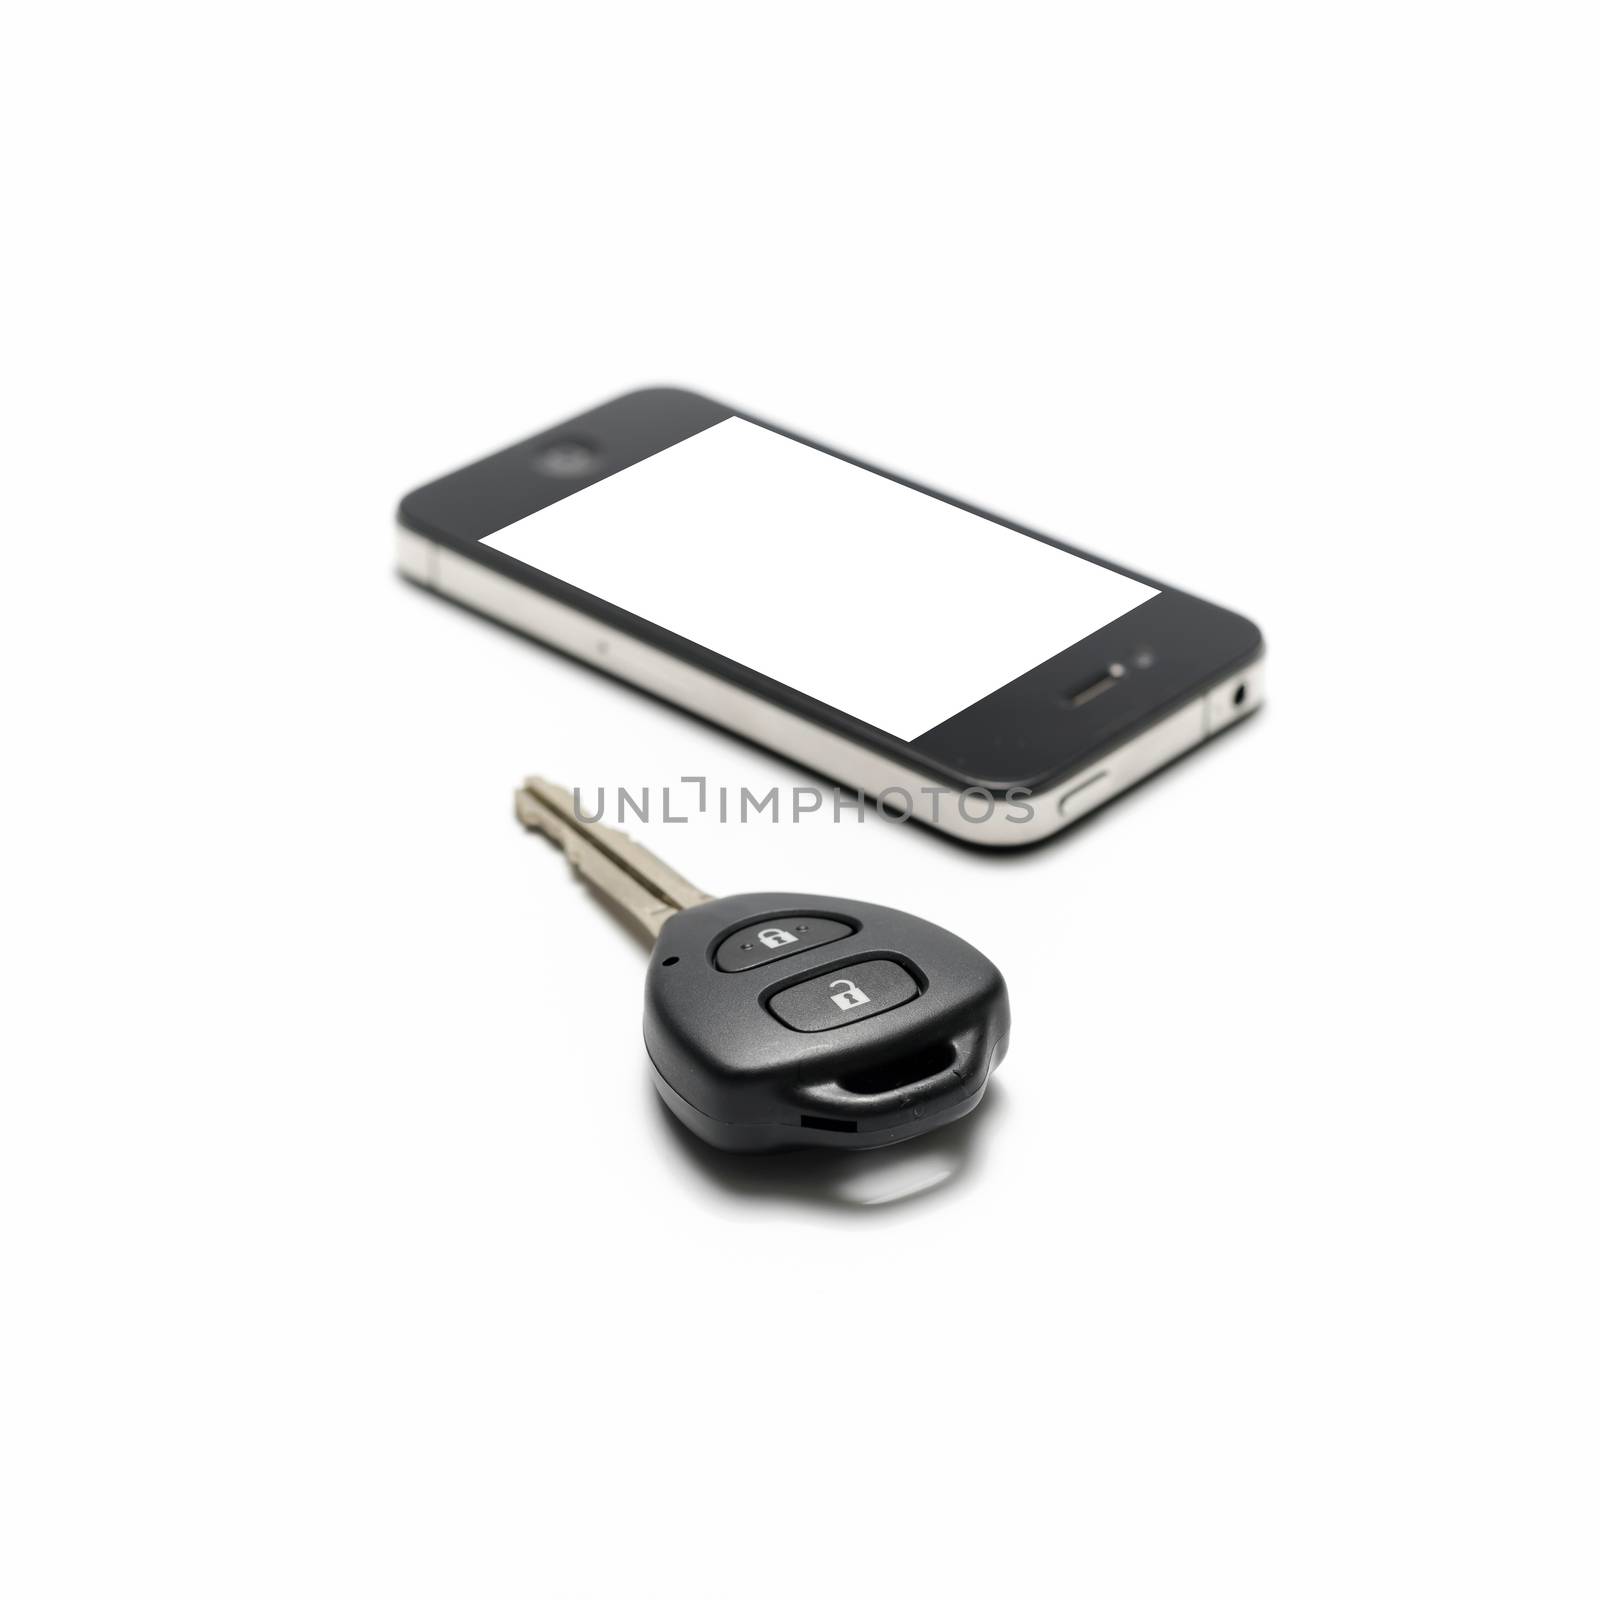 car key with smart phone isolated on white background